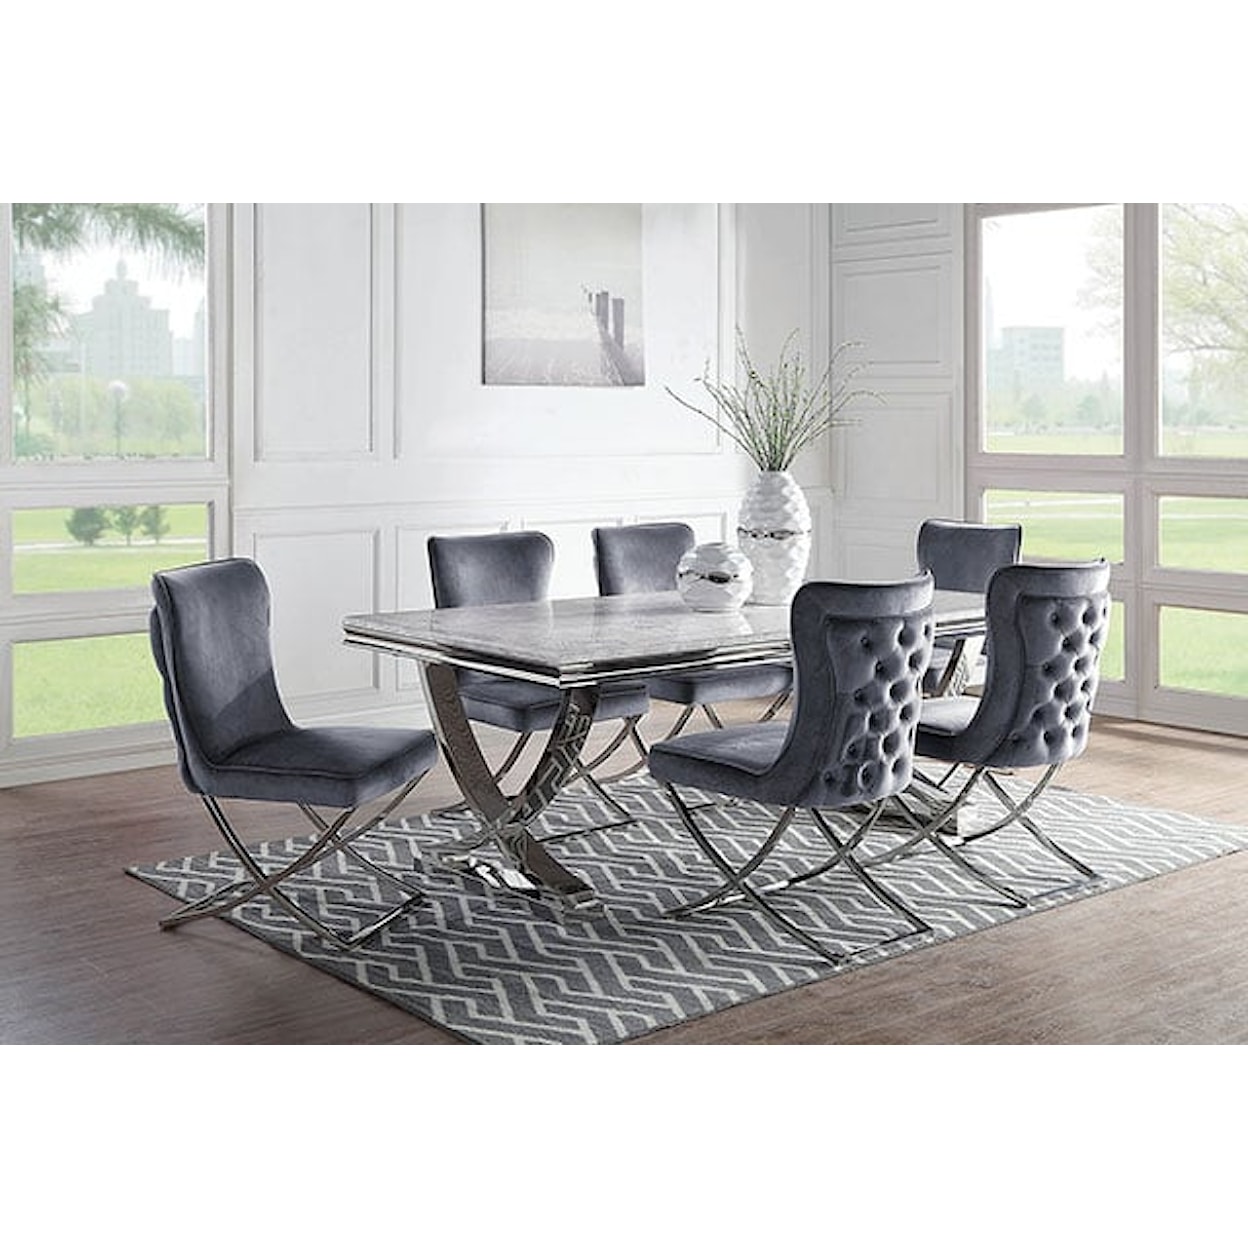 Furniture of America Wadenswil Dining Chair & Bench